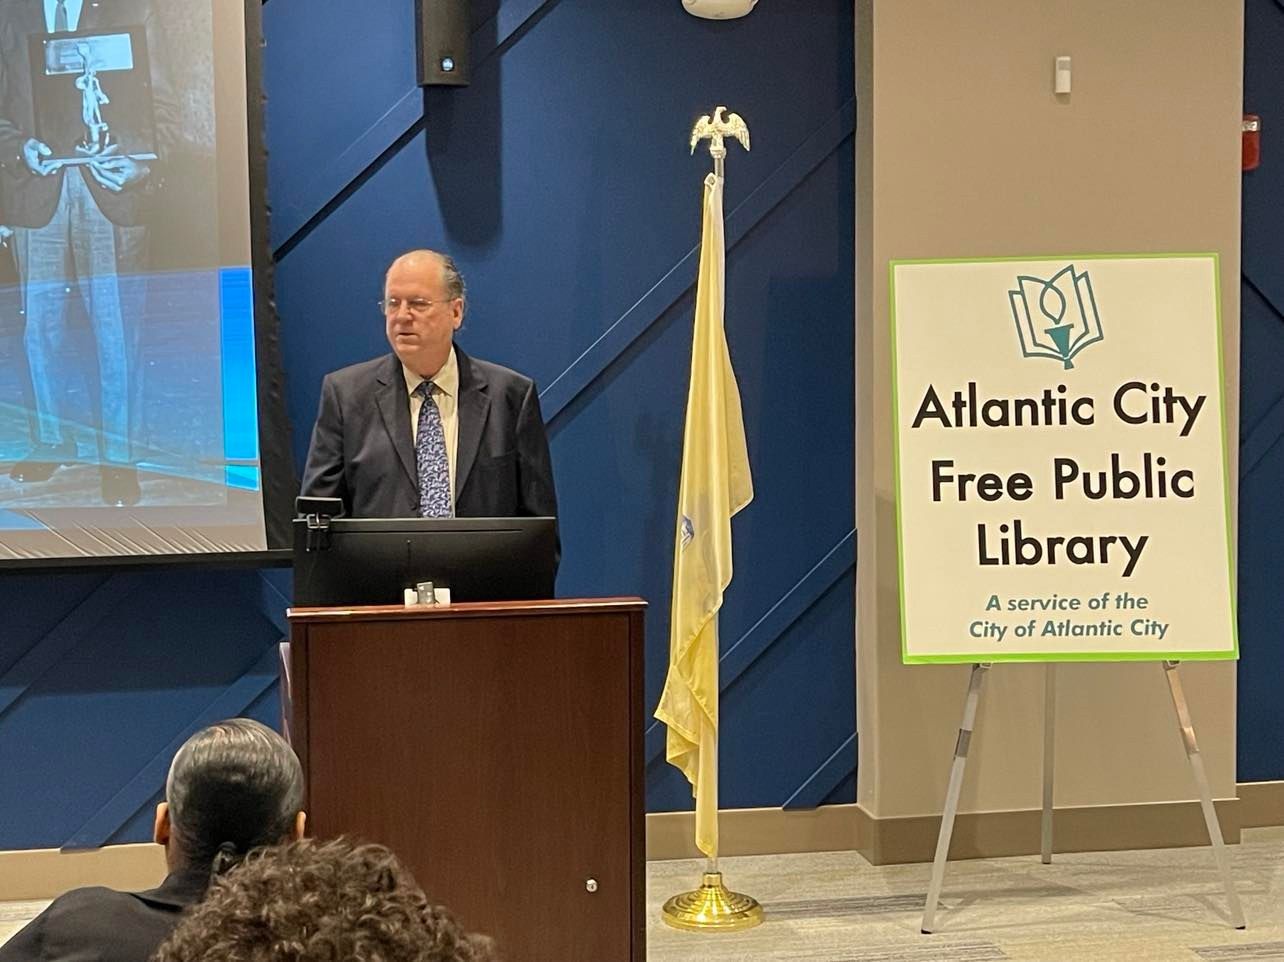 Atlantic City Free Public Library Director Robert Rynkiewicz talks about the grant that made the project possible. Photo Credit: Mark Tyler